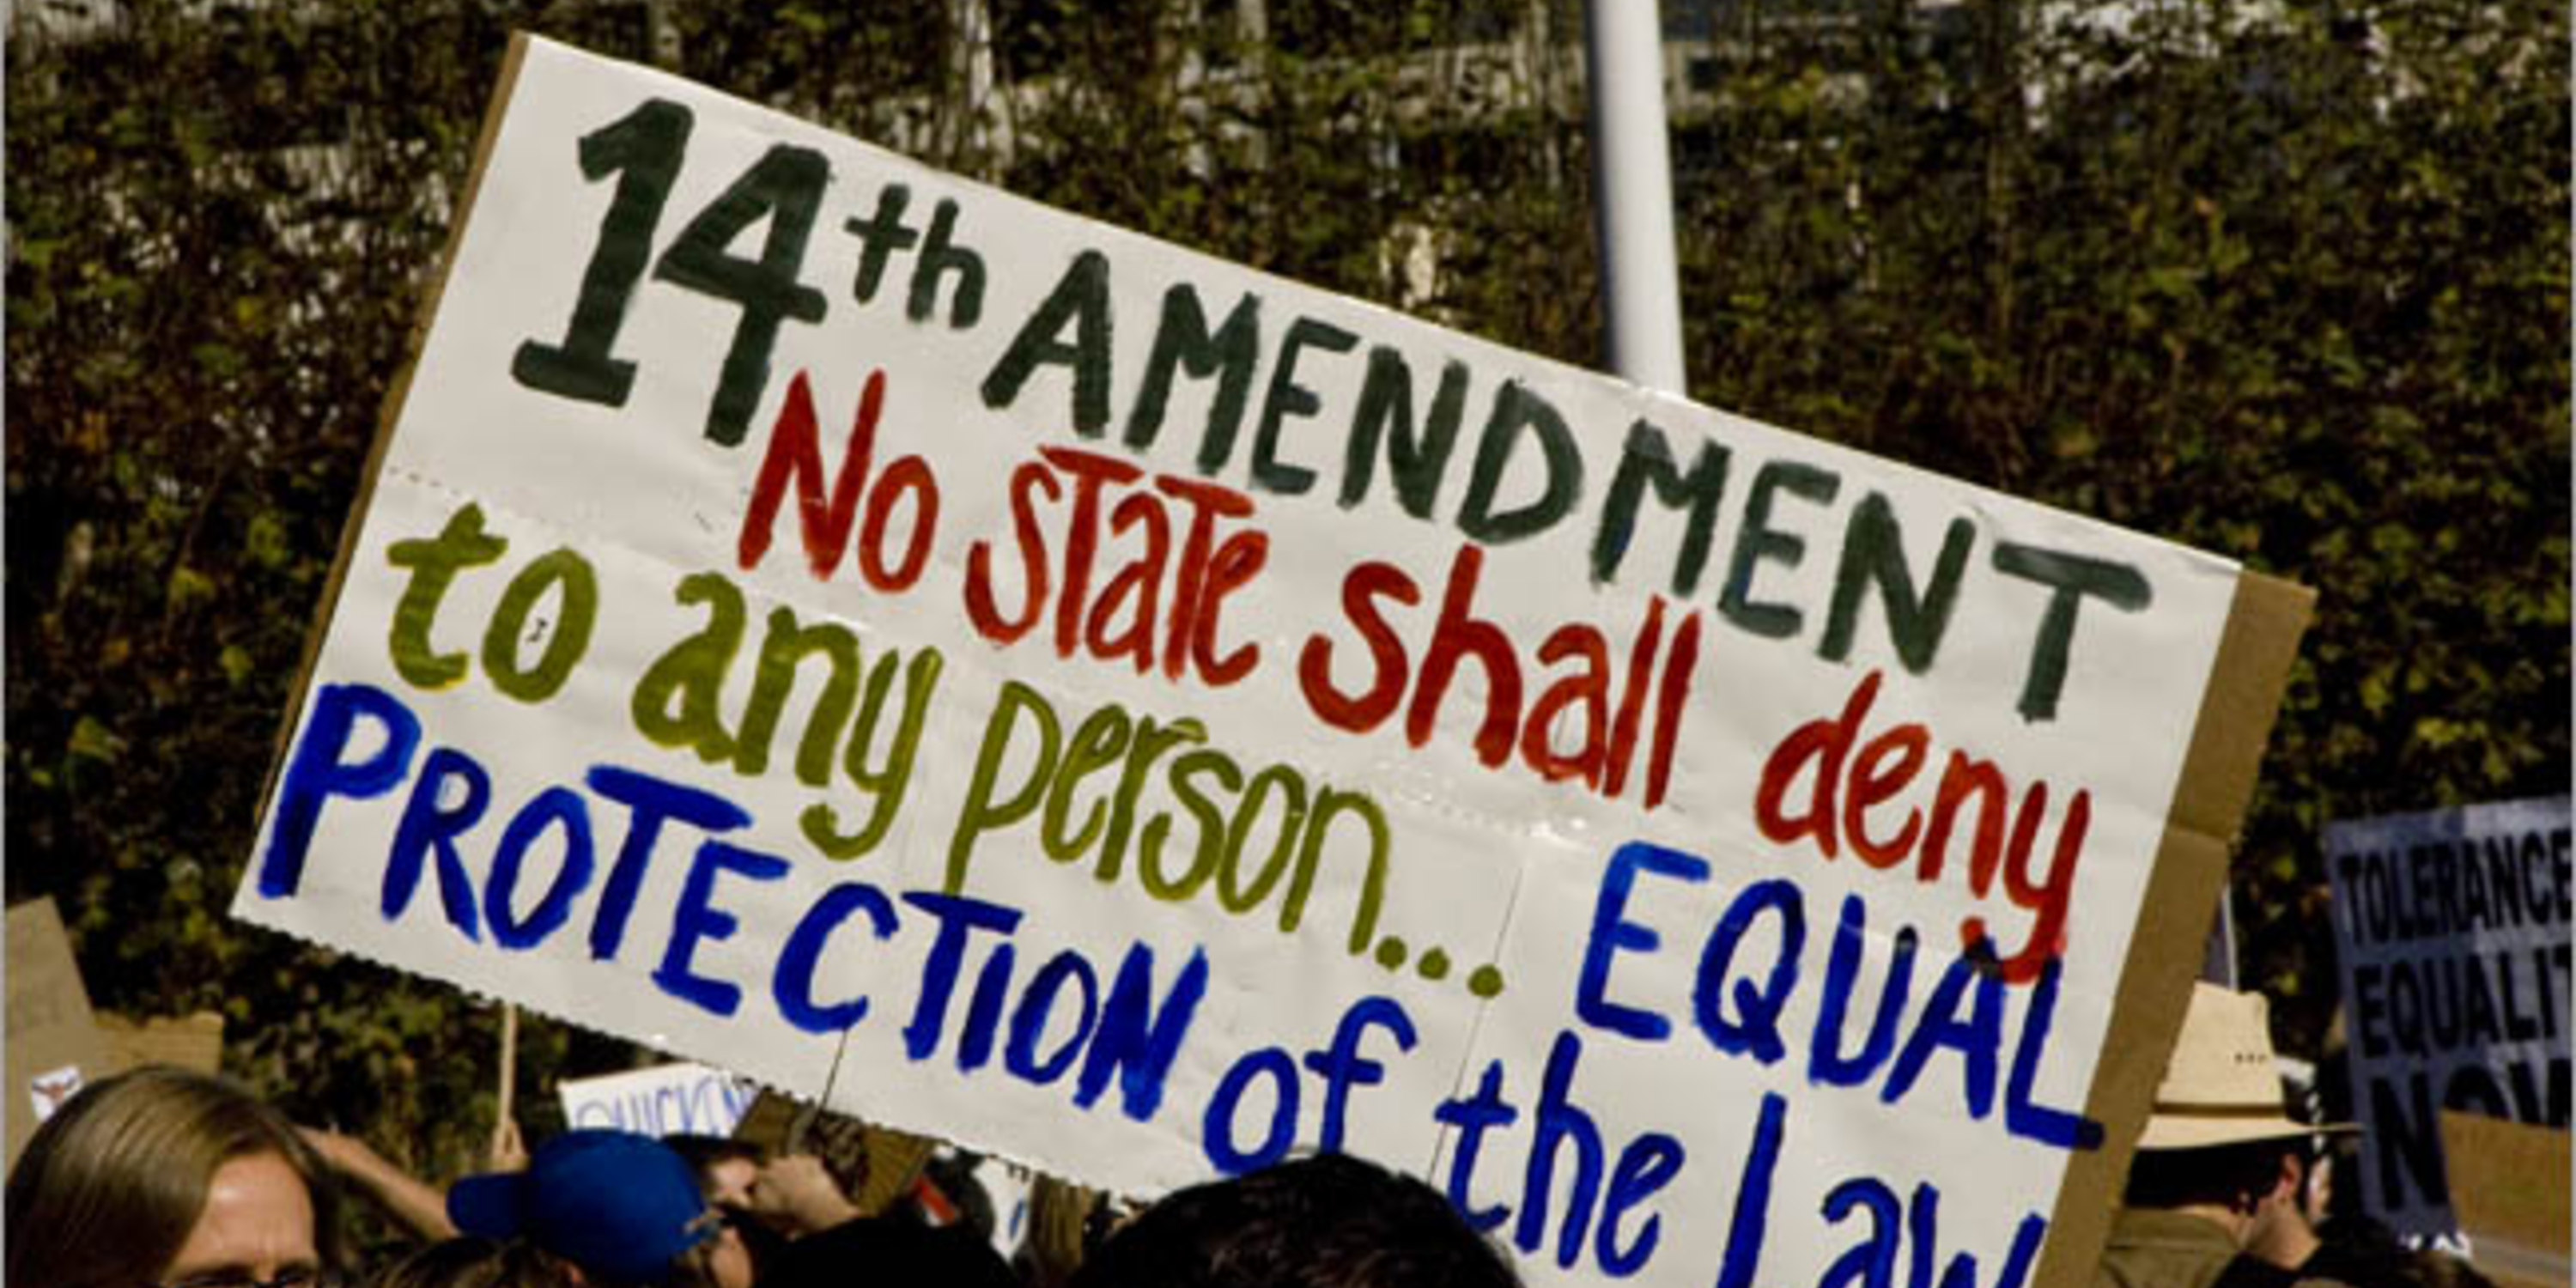 people holding sign that says 14th amendment no state shall deny to any person... equal protection of the law